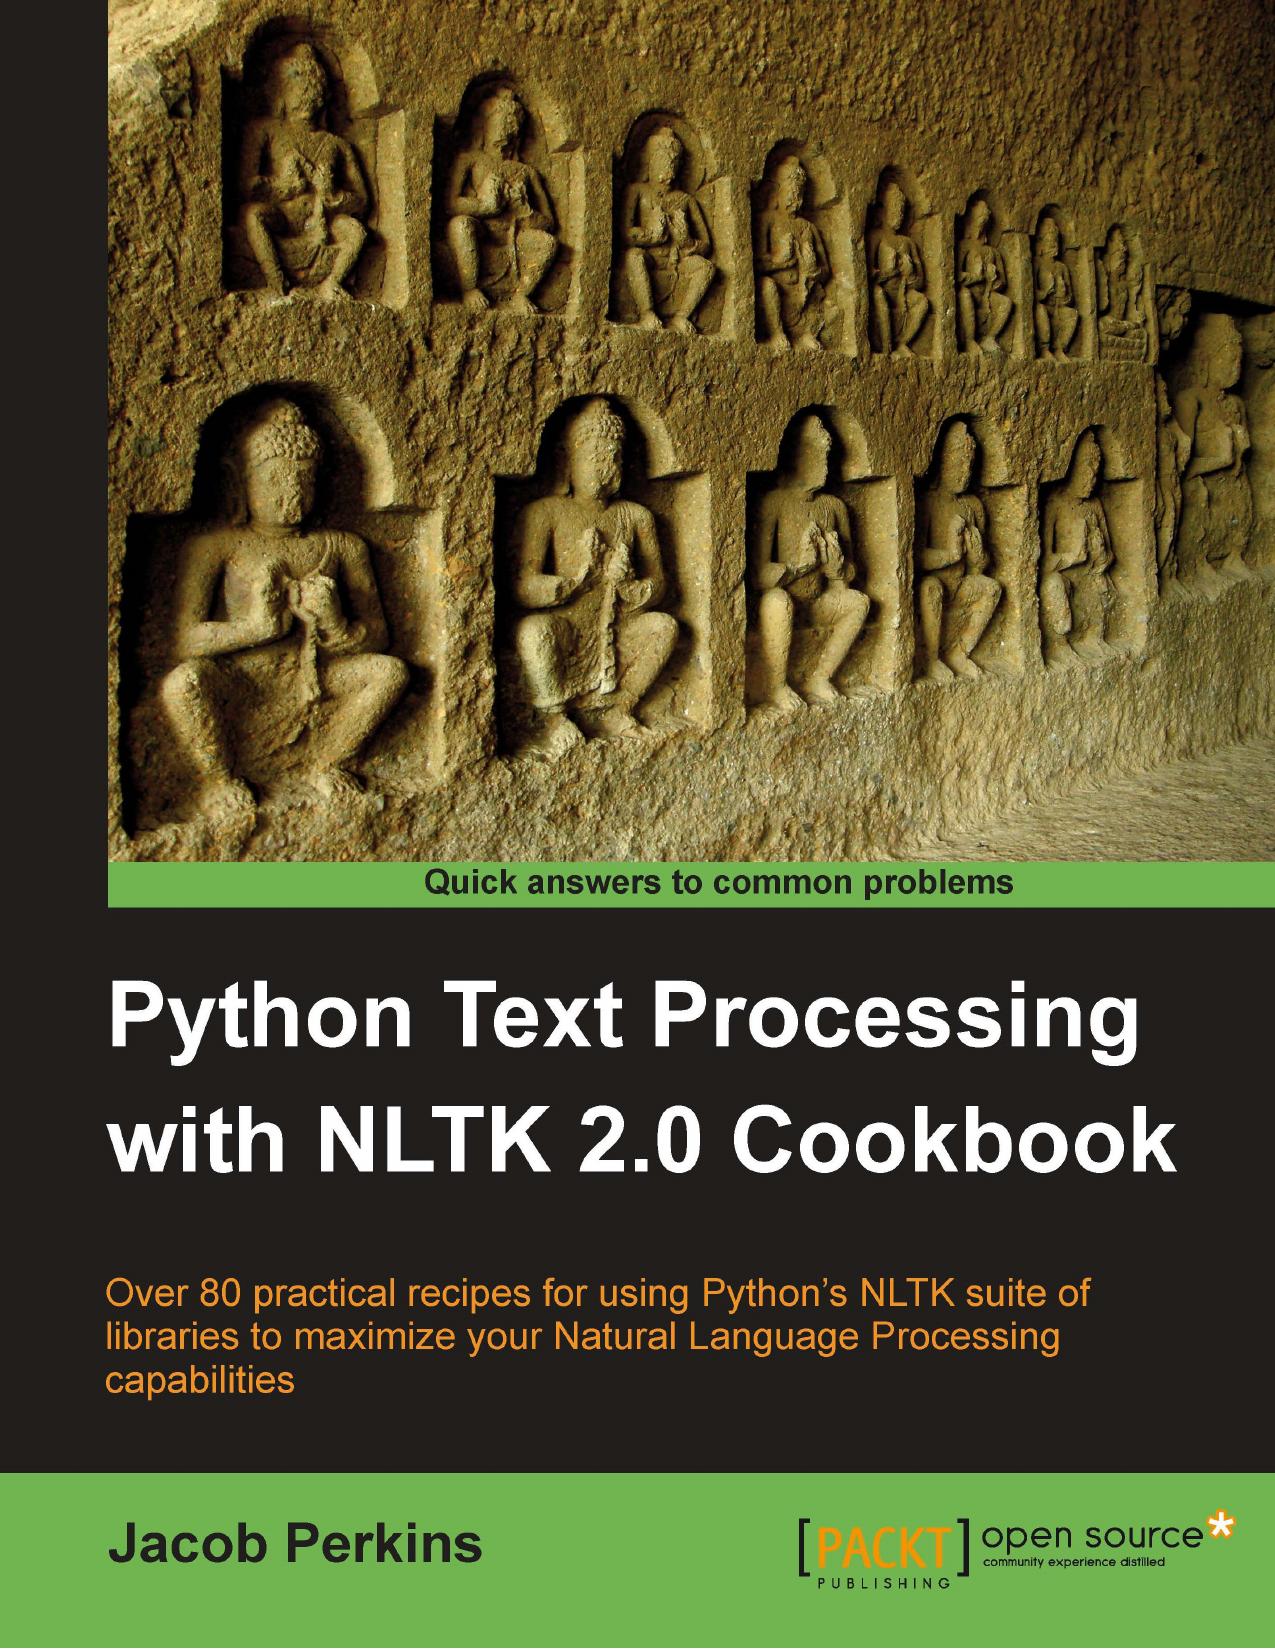 Python Text Processing with NLTK 2.0 Cookbook: Over 80 Practical Recipes for using Python's NLTK Suite of Libraries to Maximize Your Natural Language Processing Capabilities